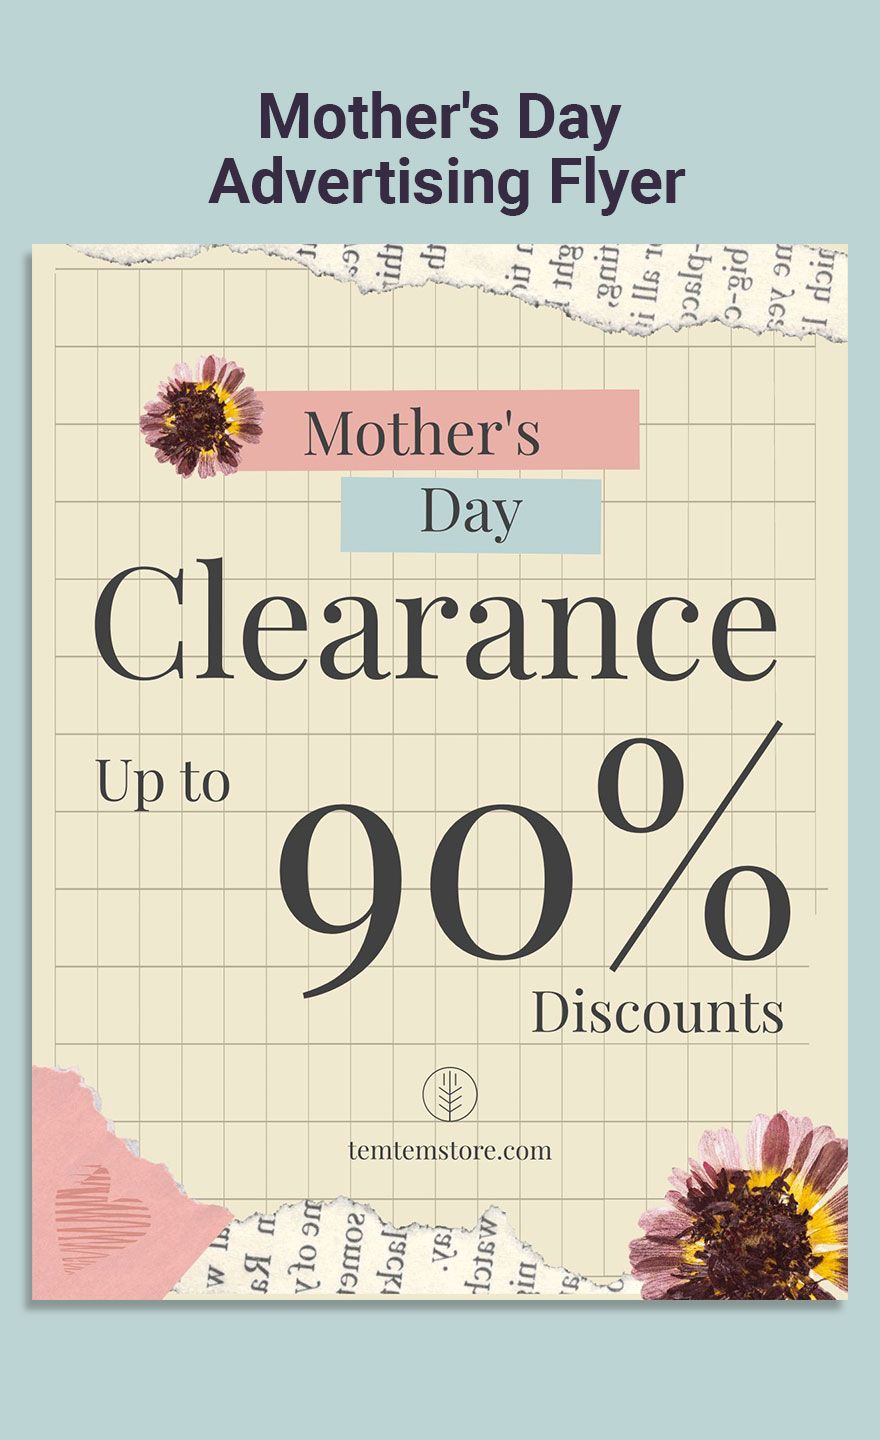 Mother's Day Advertising Flyer